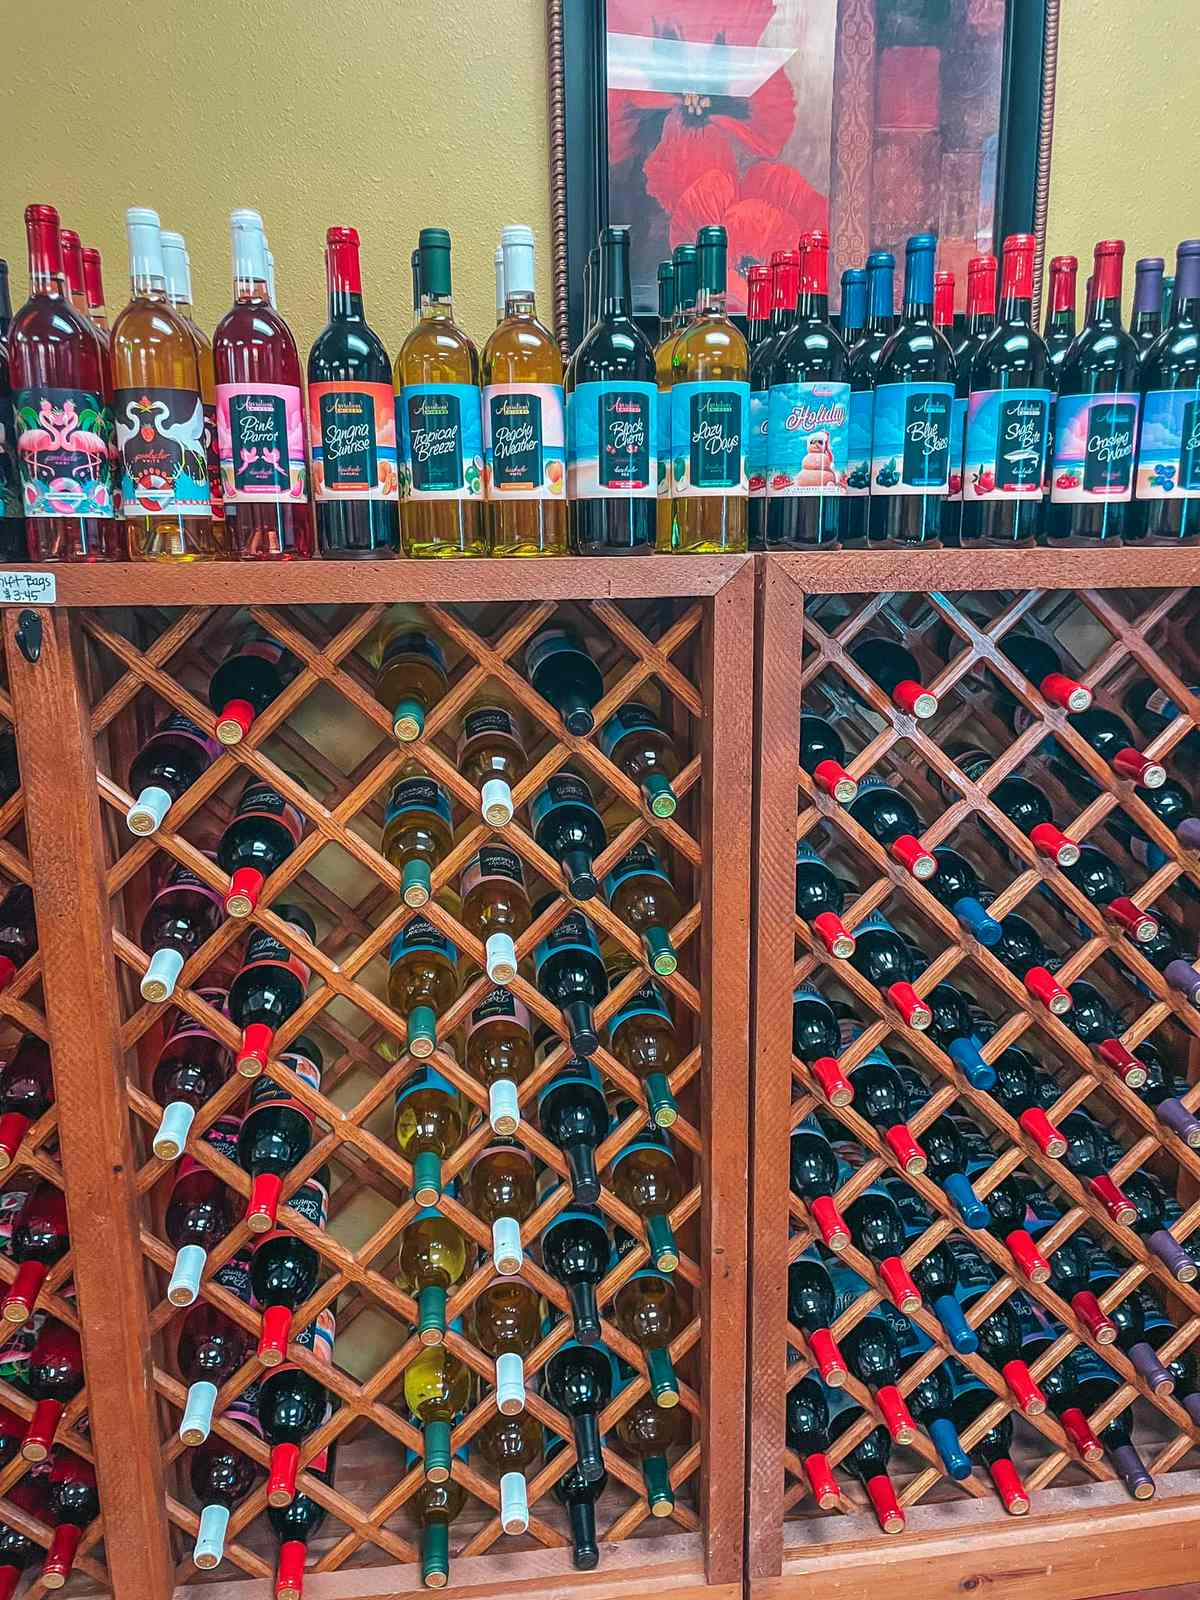 Wine bottles from Aspirations Winery in Clearwater, one of the best wineries in Tampa Bay